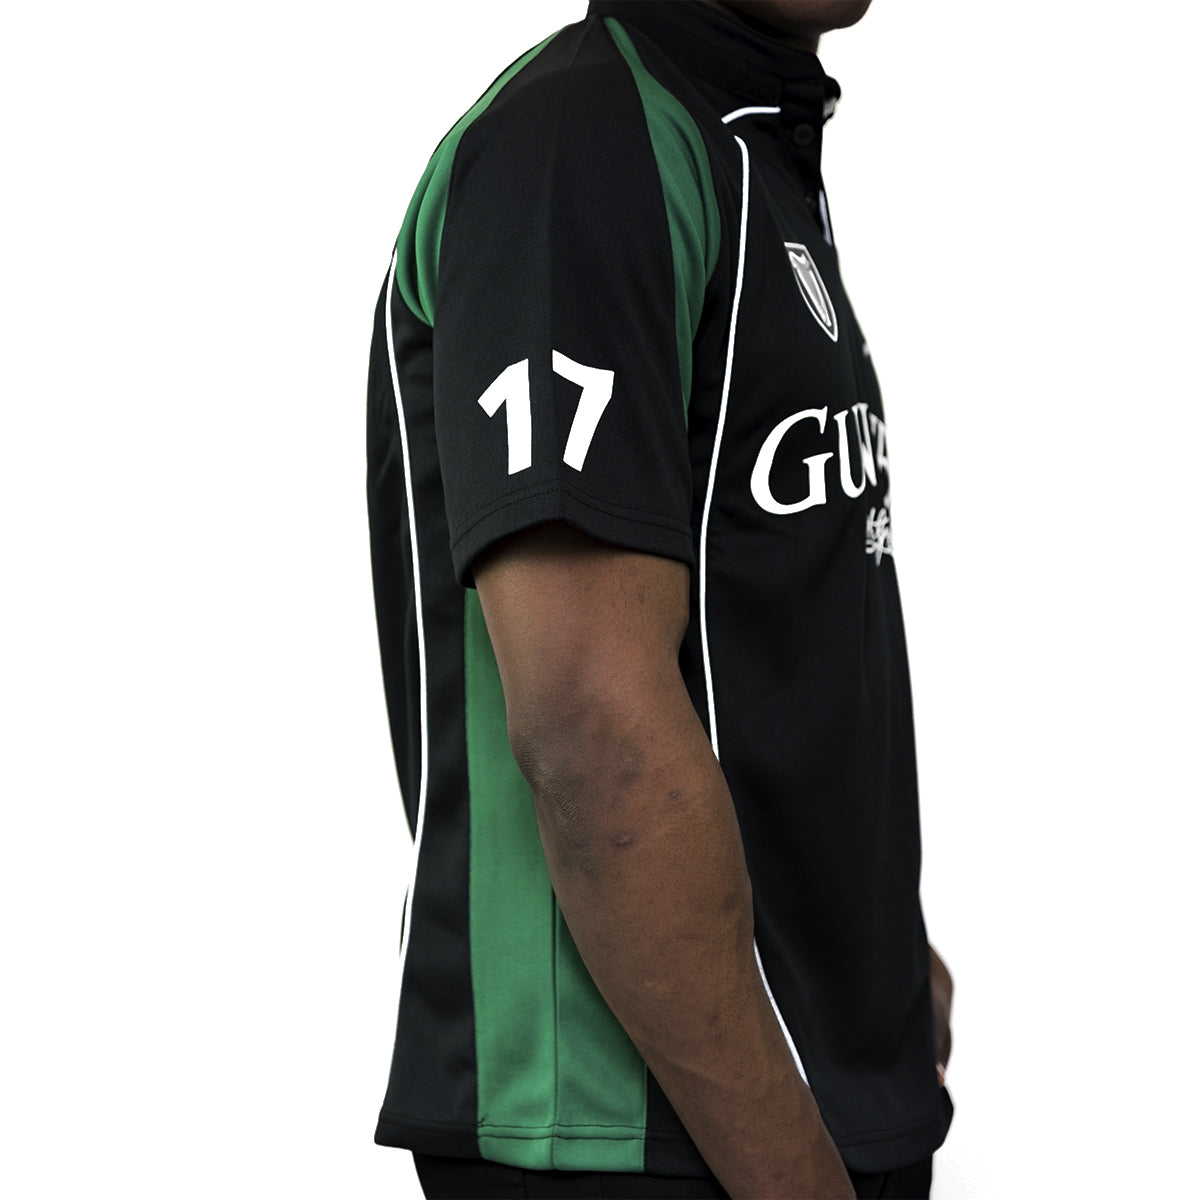 A man wearing a Guinness Black and Green Short sleeve performance Rugby Jersey by Guinness UK.